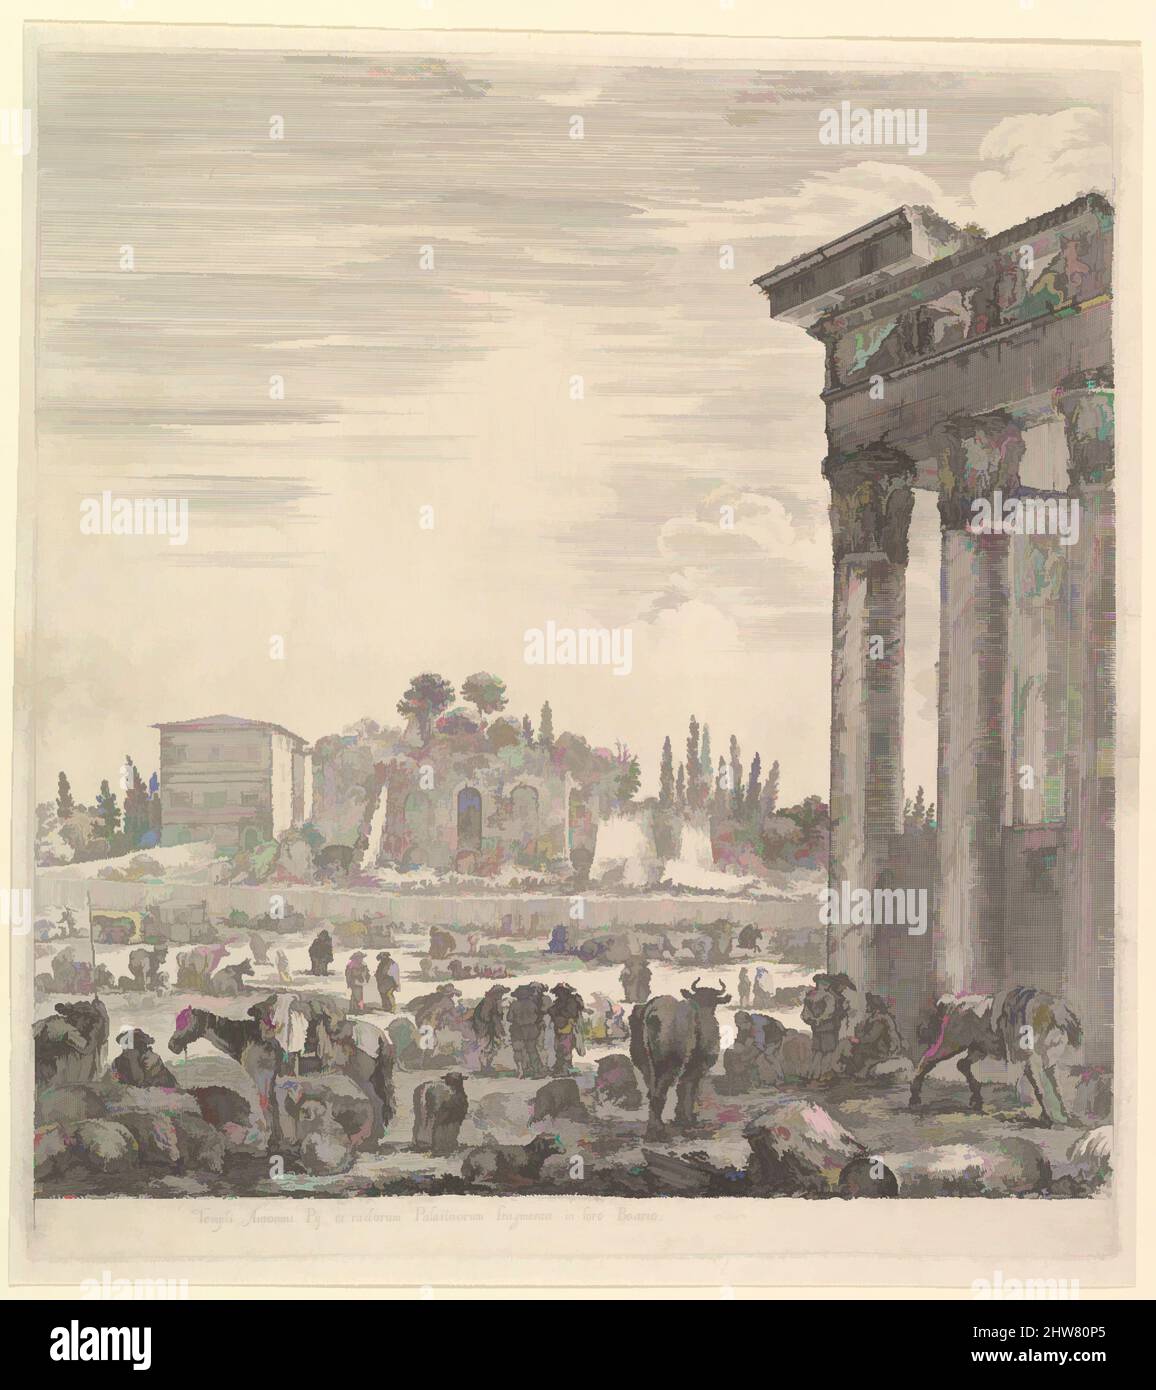 Art inspired by The columns of the Temple of Antoninus to right, a part of the Campo Vaccino in center and at left, along with various animals and figures, the Palatine ruins in the background, from 'Six large views, four of Rome, and two of the Roman countryside' (Six grandes vues, Classic works modernized by Artotop with a splash of modernity. Shapes, color and value, eye-catching visual impact on art. Emotions through freedom of artworks in a contemporary way. A timeless message pursuing a wildly creative new direction. Artists turning to the digital medium and creating the Artotop NFT Stock Photo